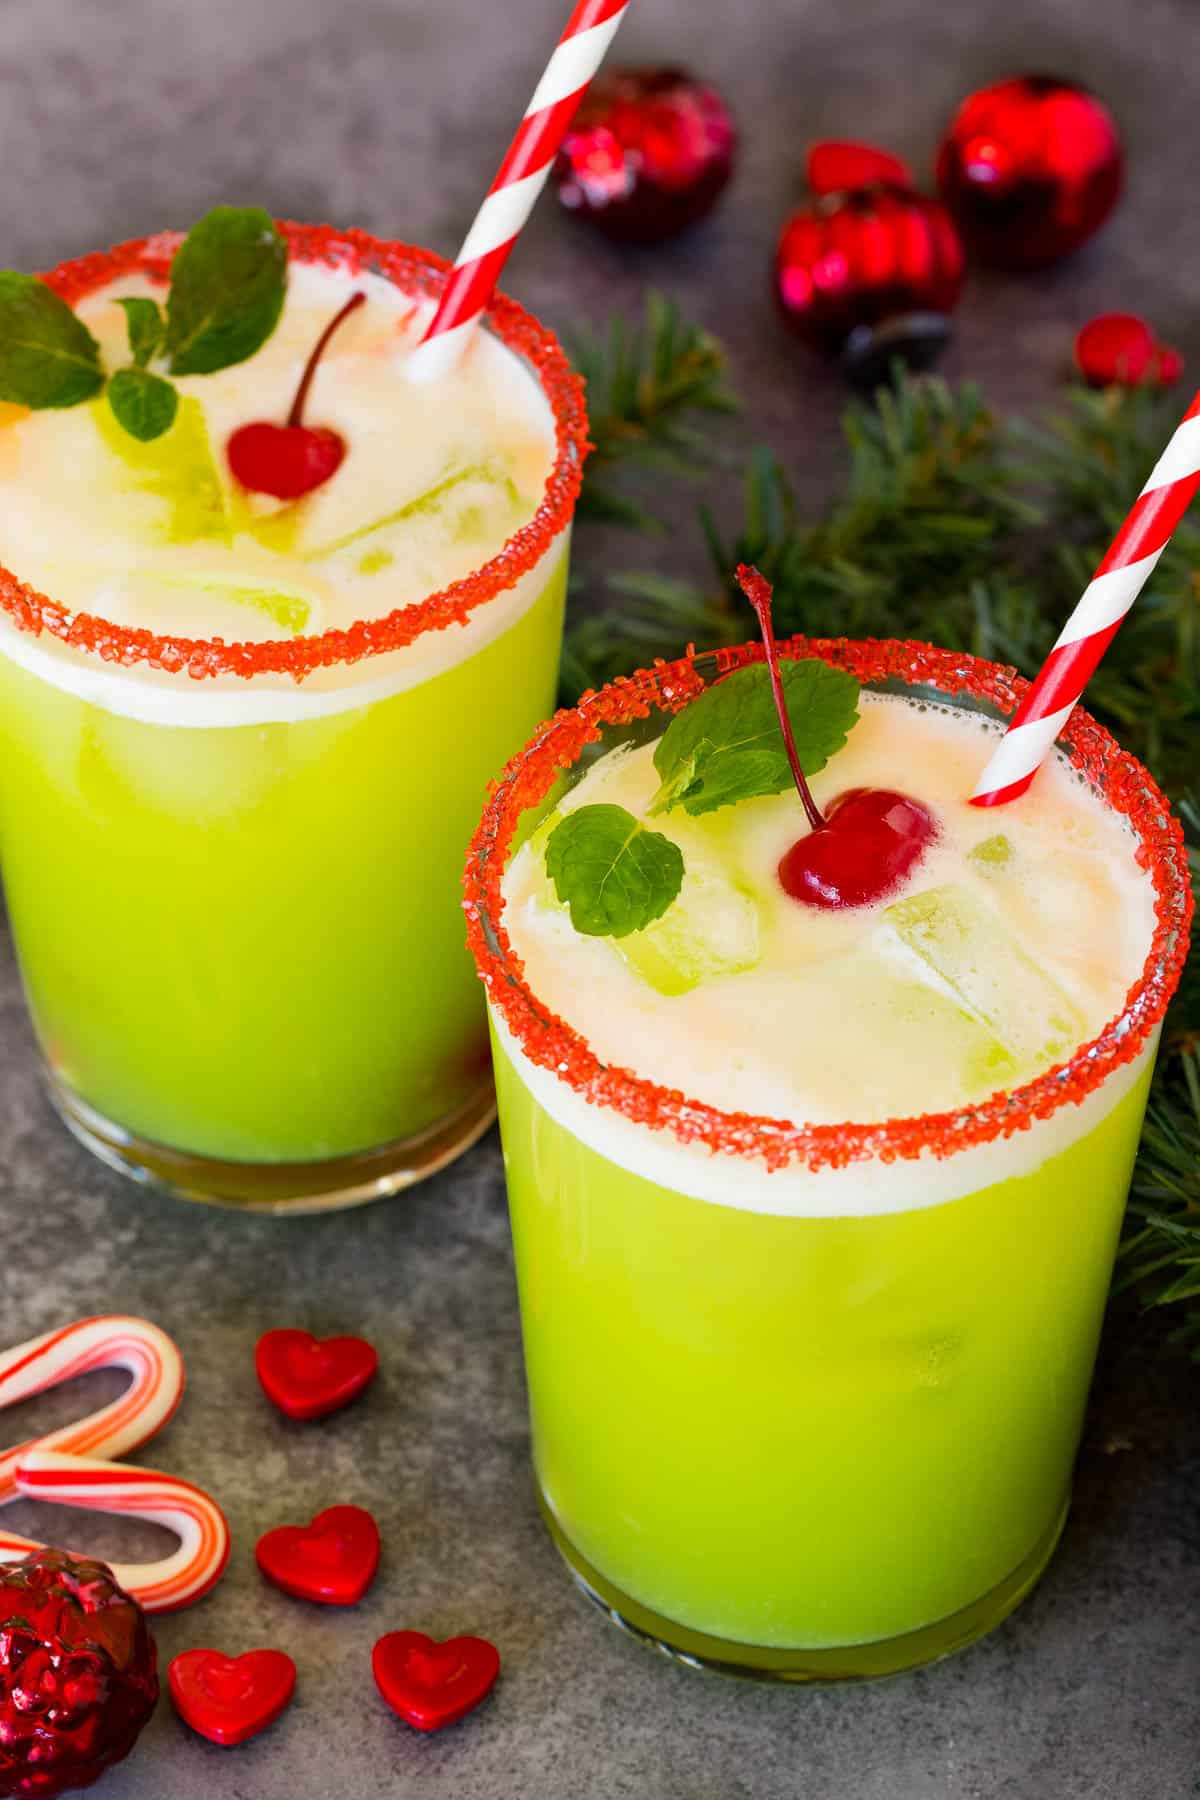 Cups of Grinch punch topped with cherries and mint sprigs.